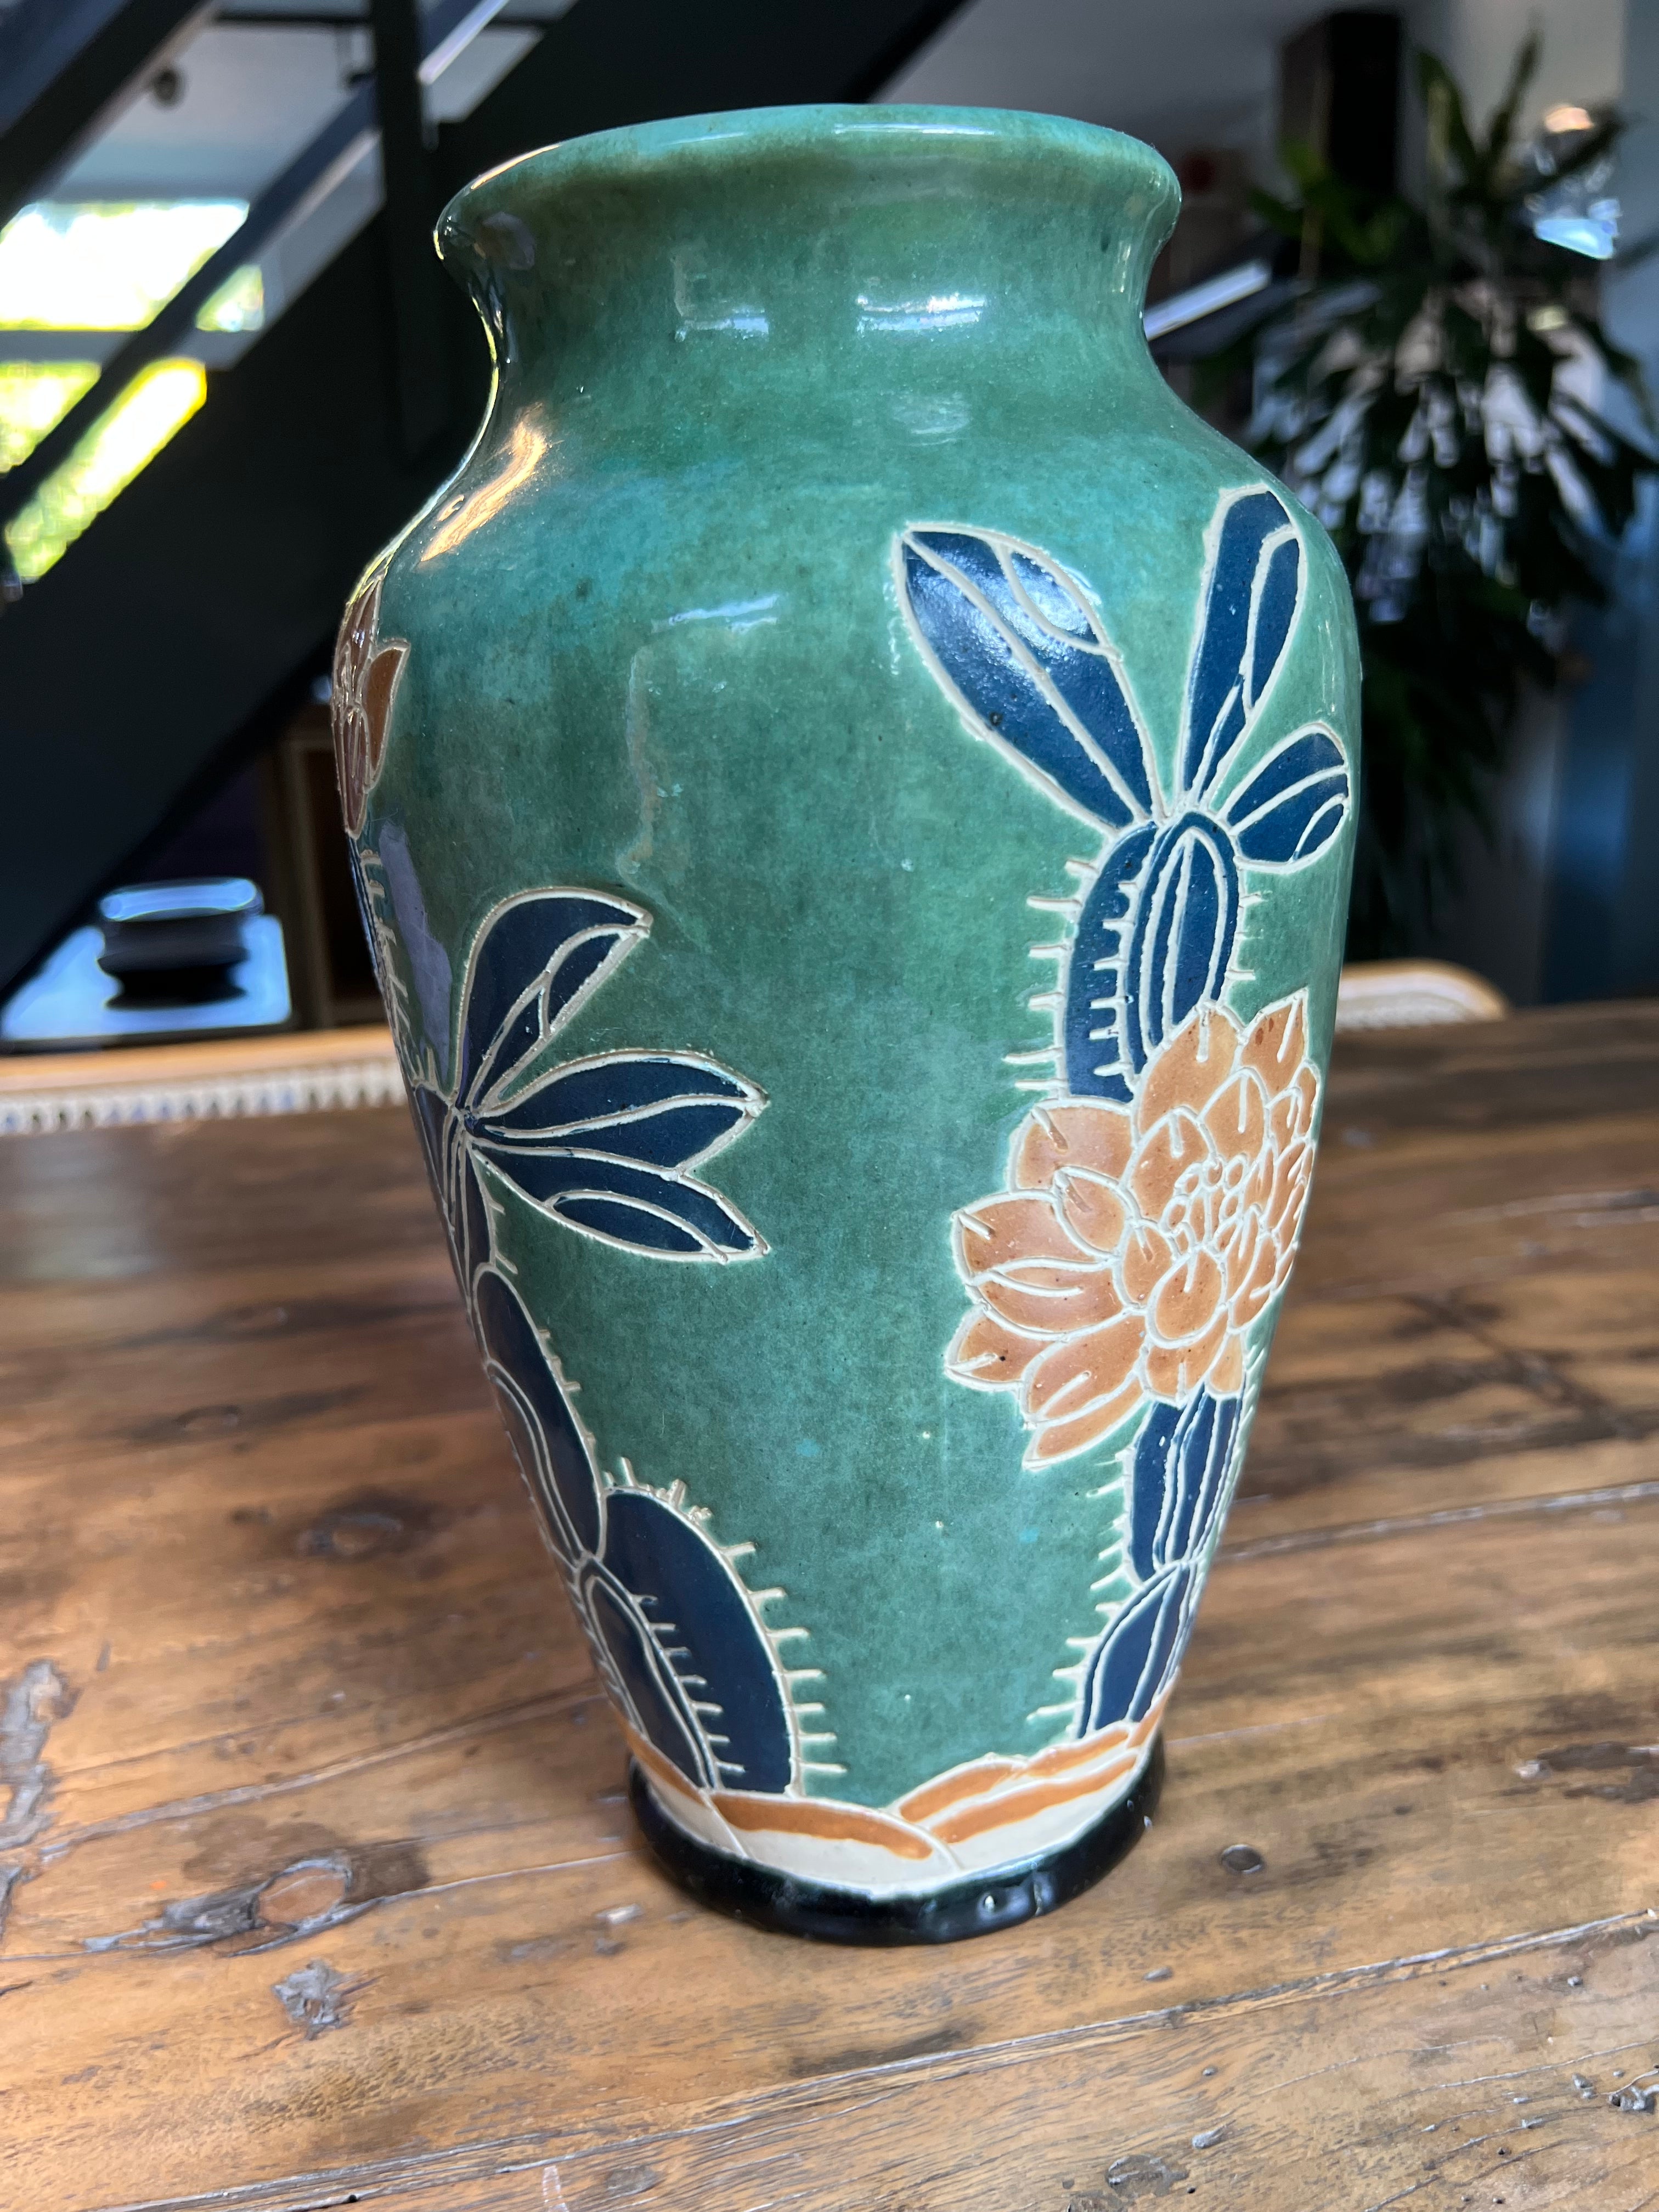 Vintage Large Vase, Hand-Painted & Etched Pottery